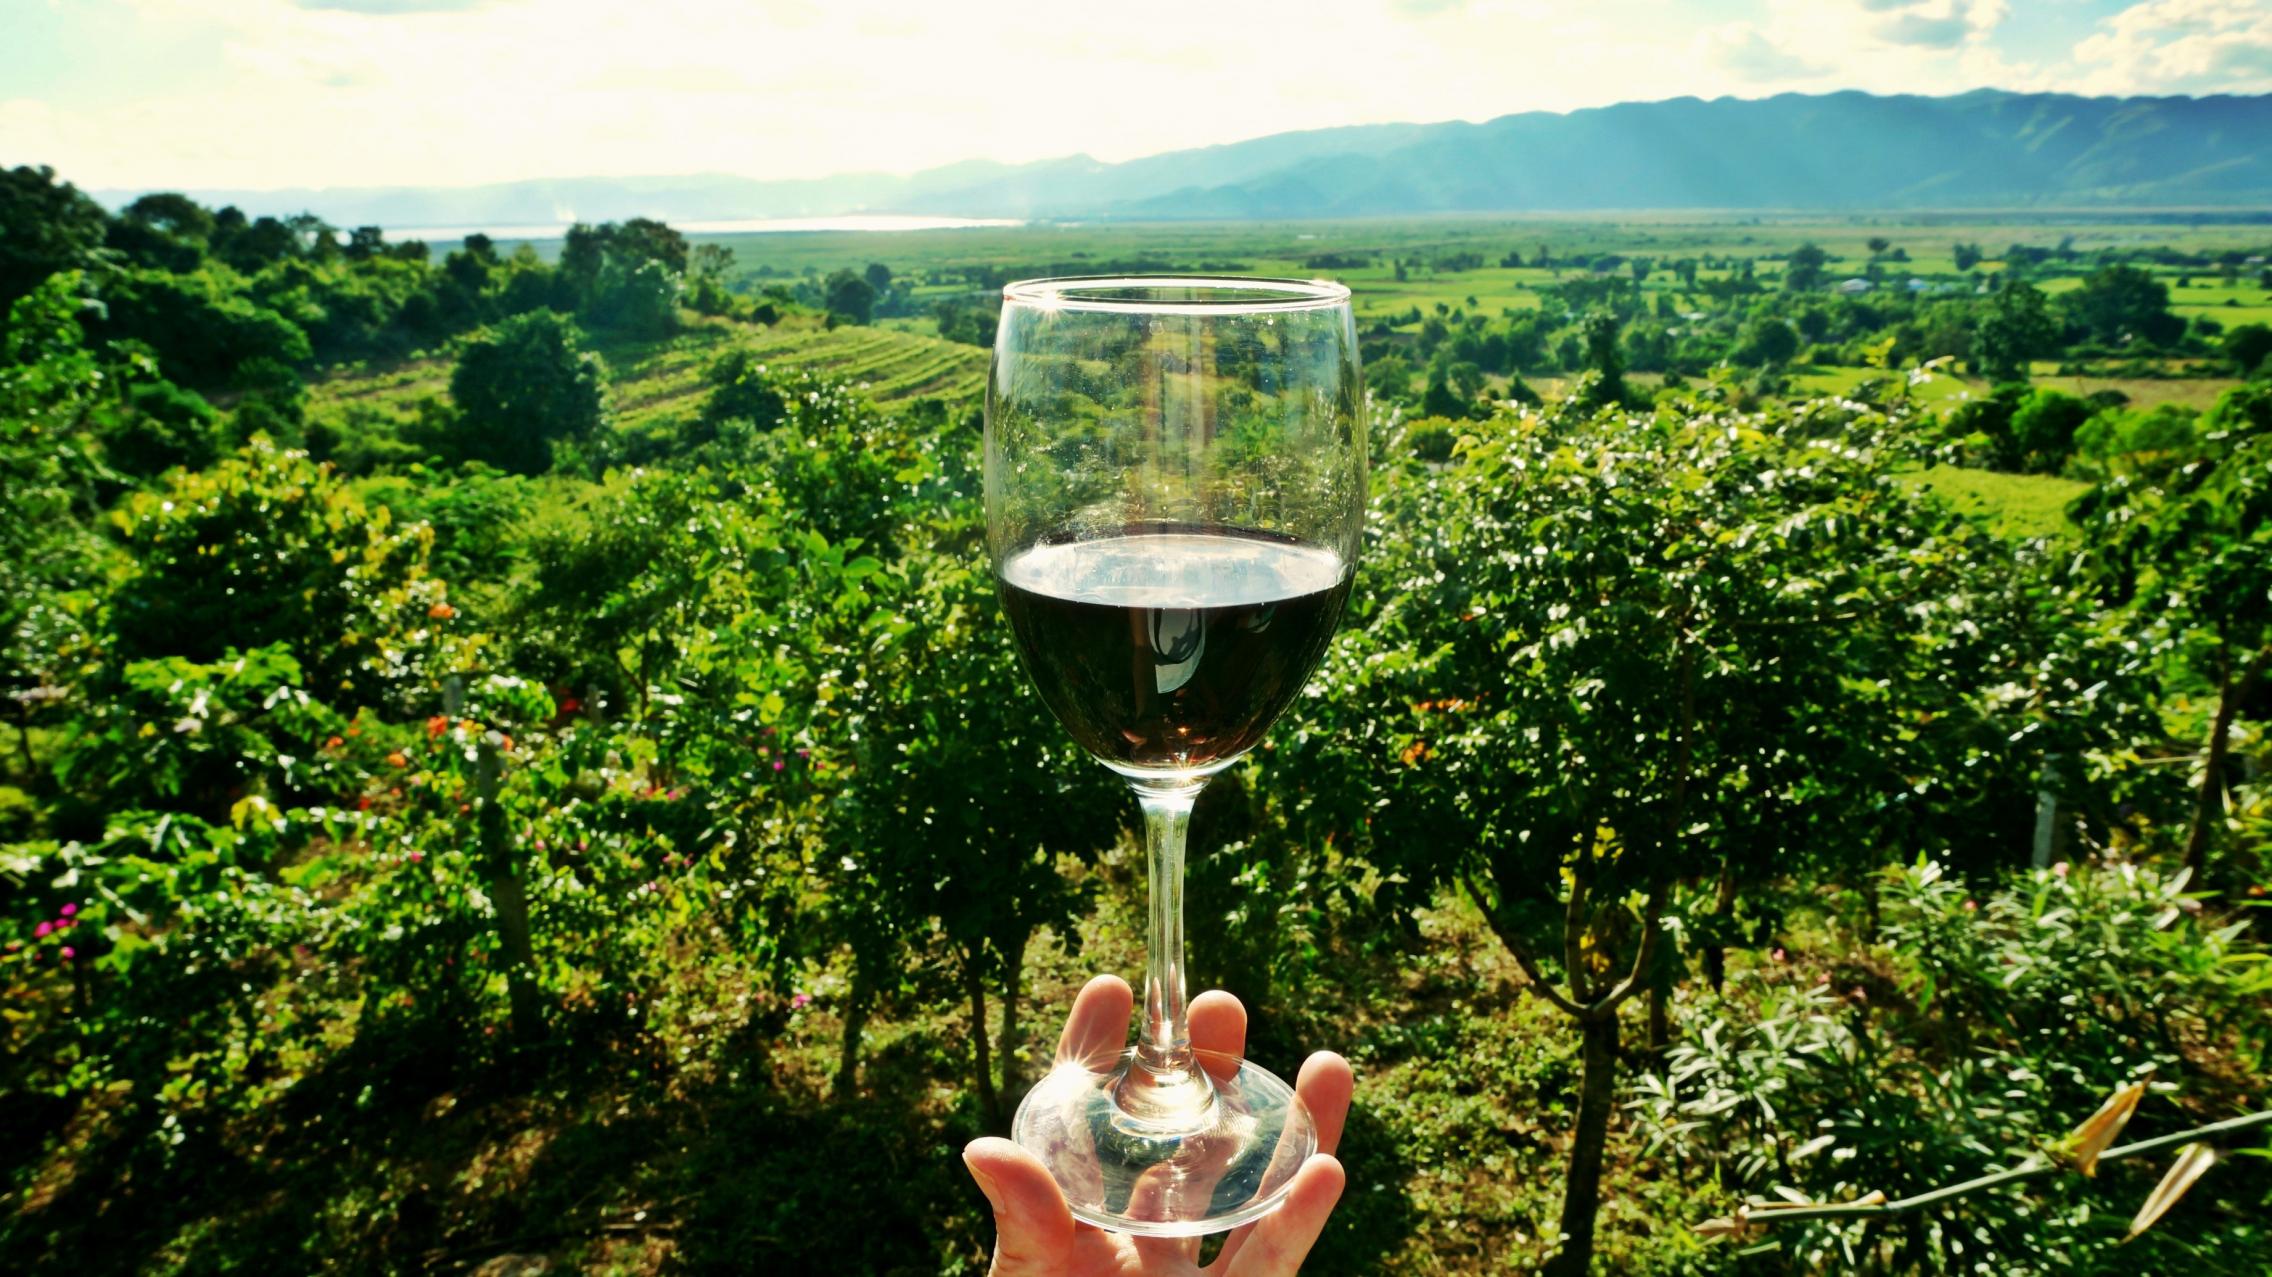 Wine glass in front of vineyards